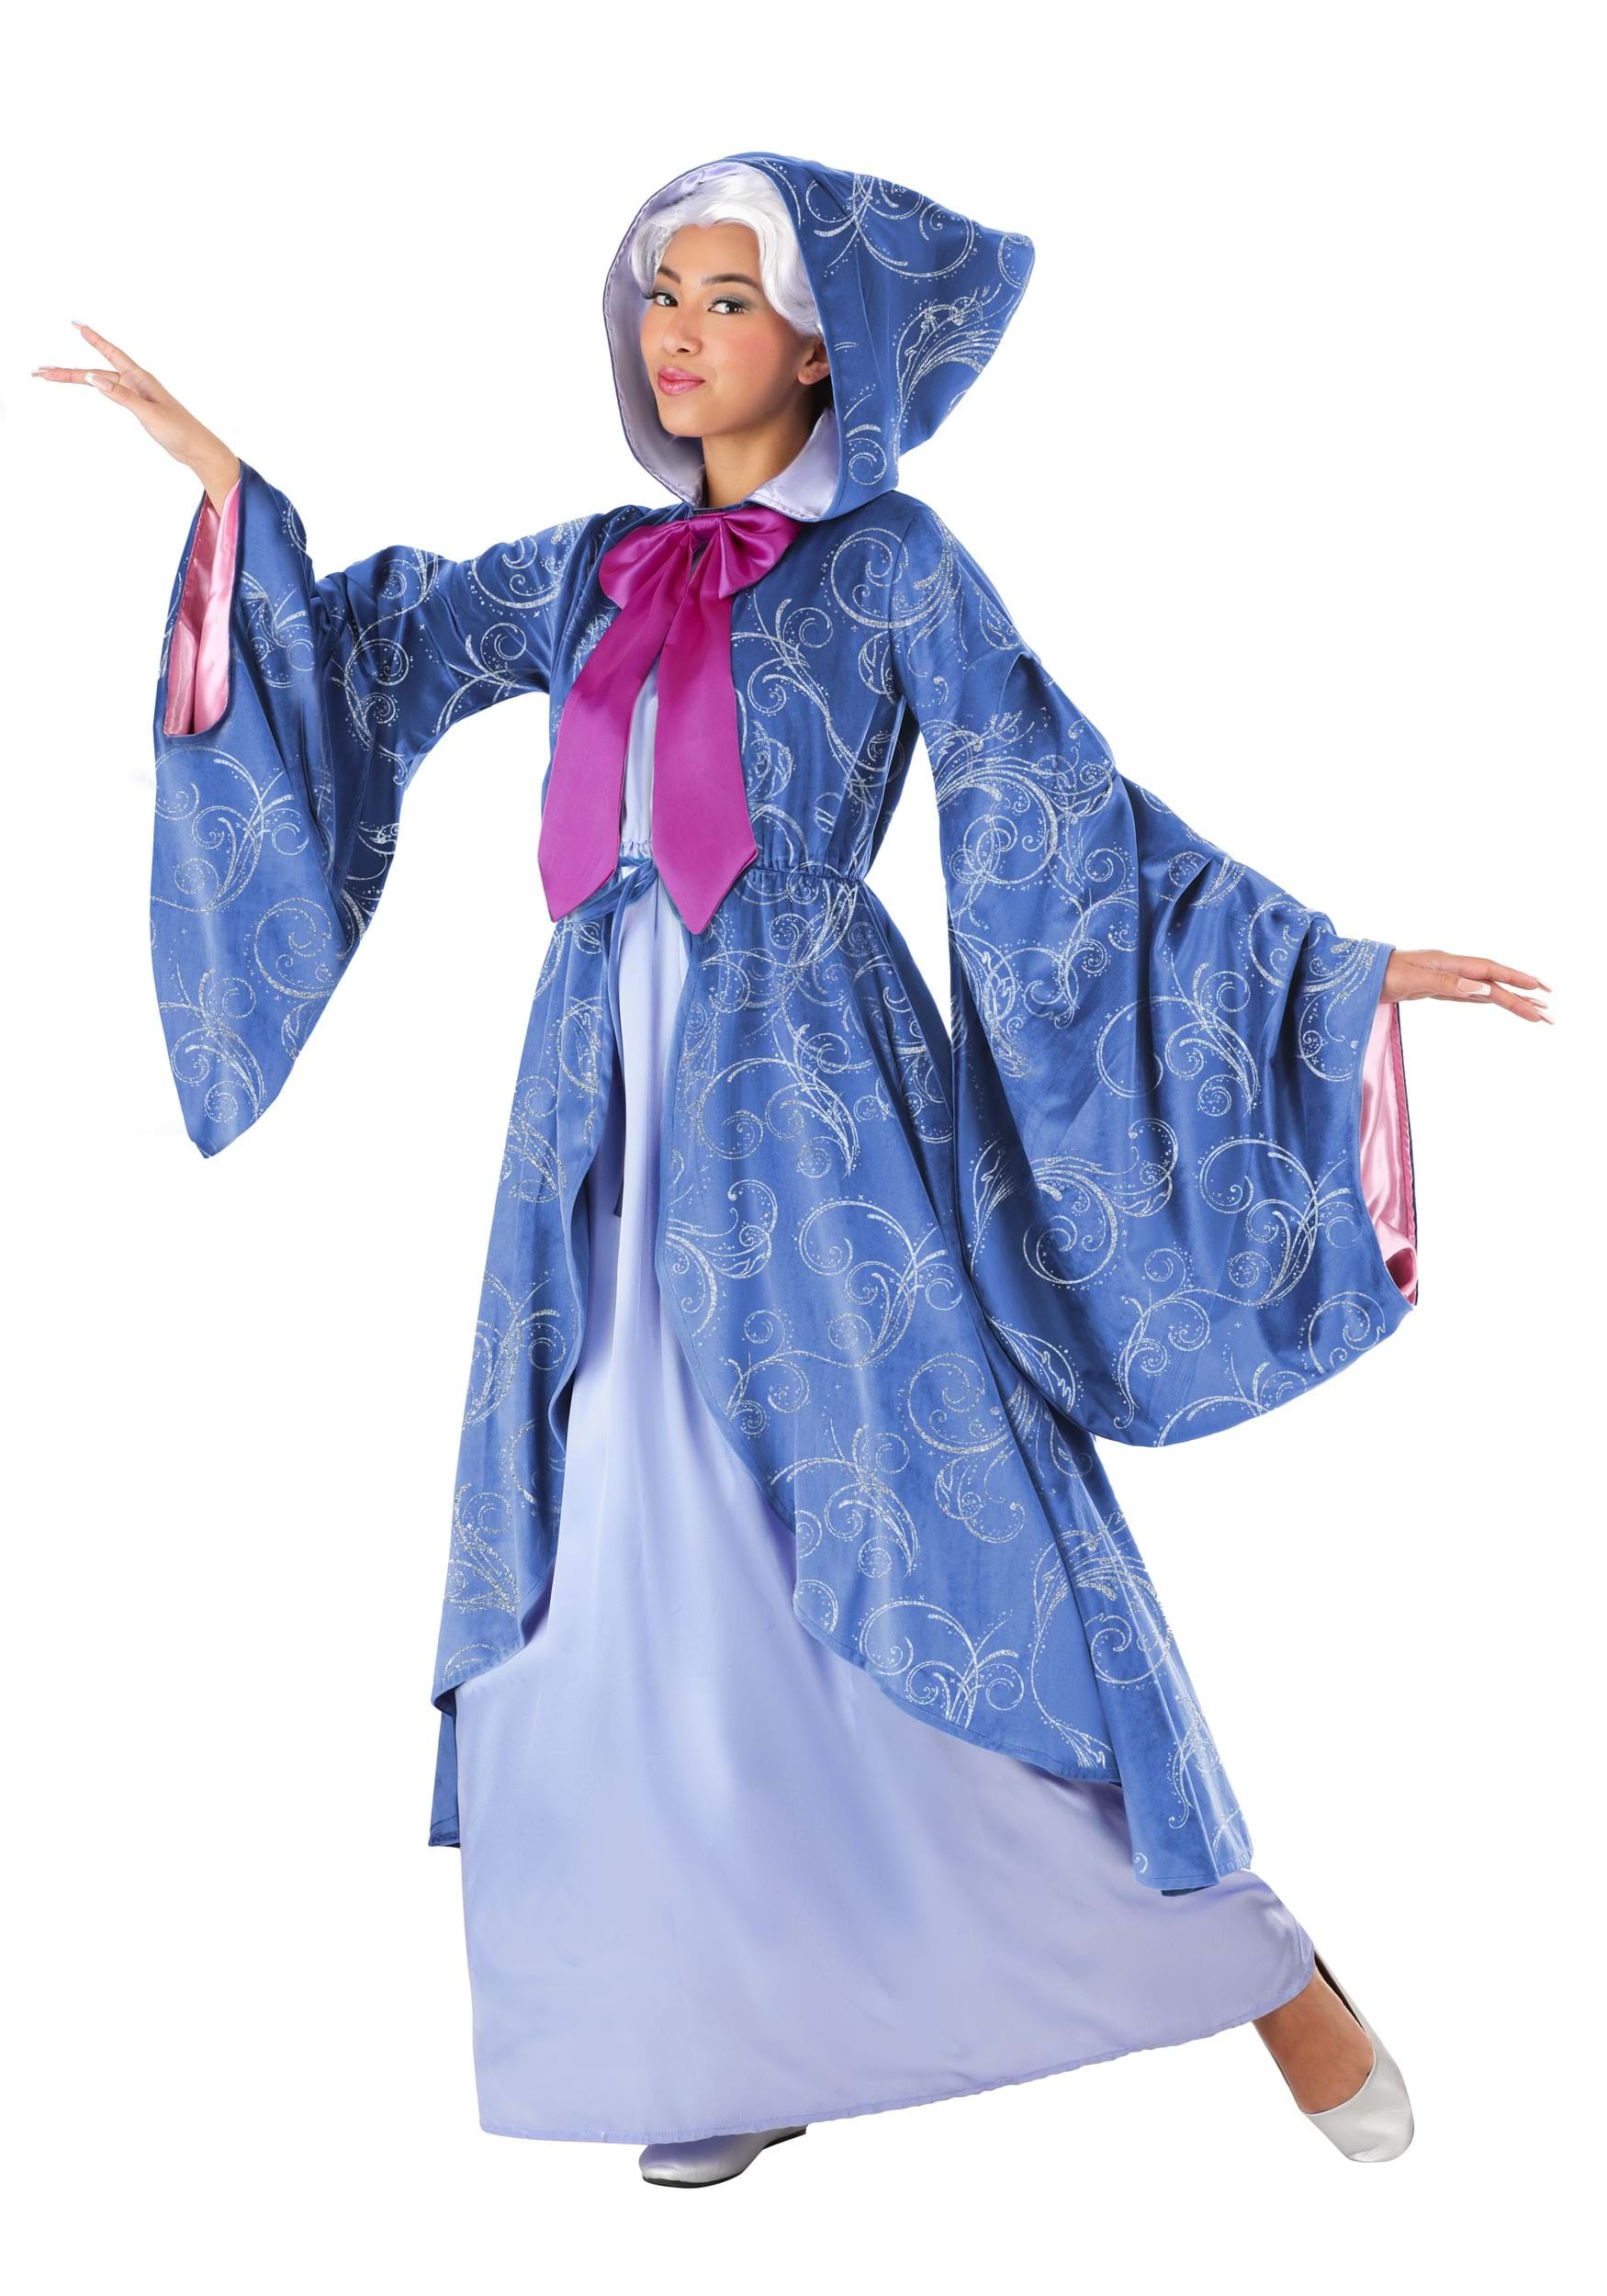 Premium Fairy Godmother Costume for Adults